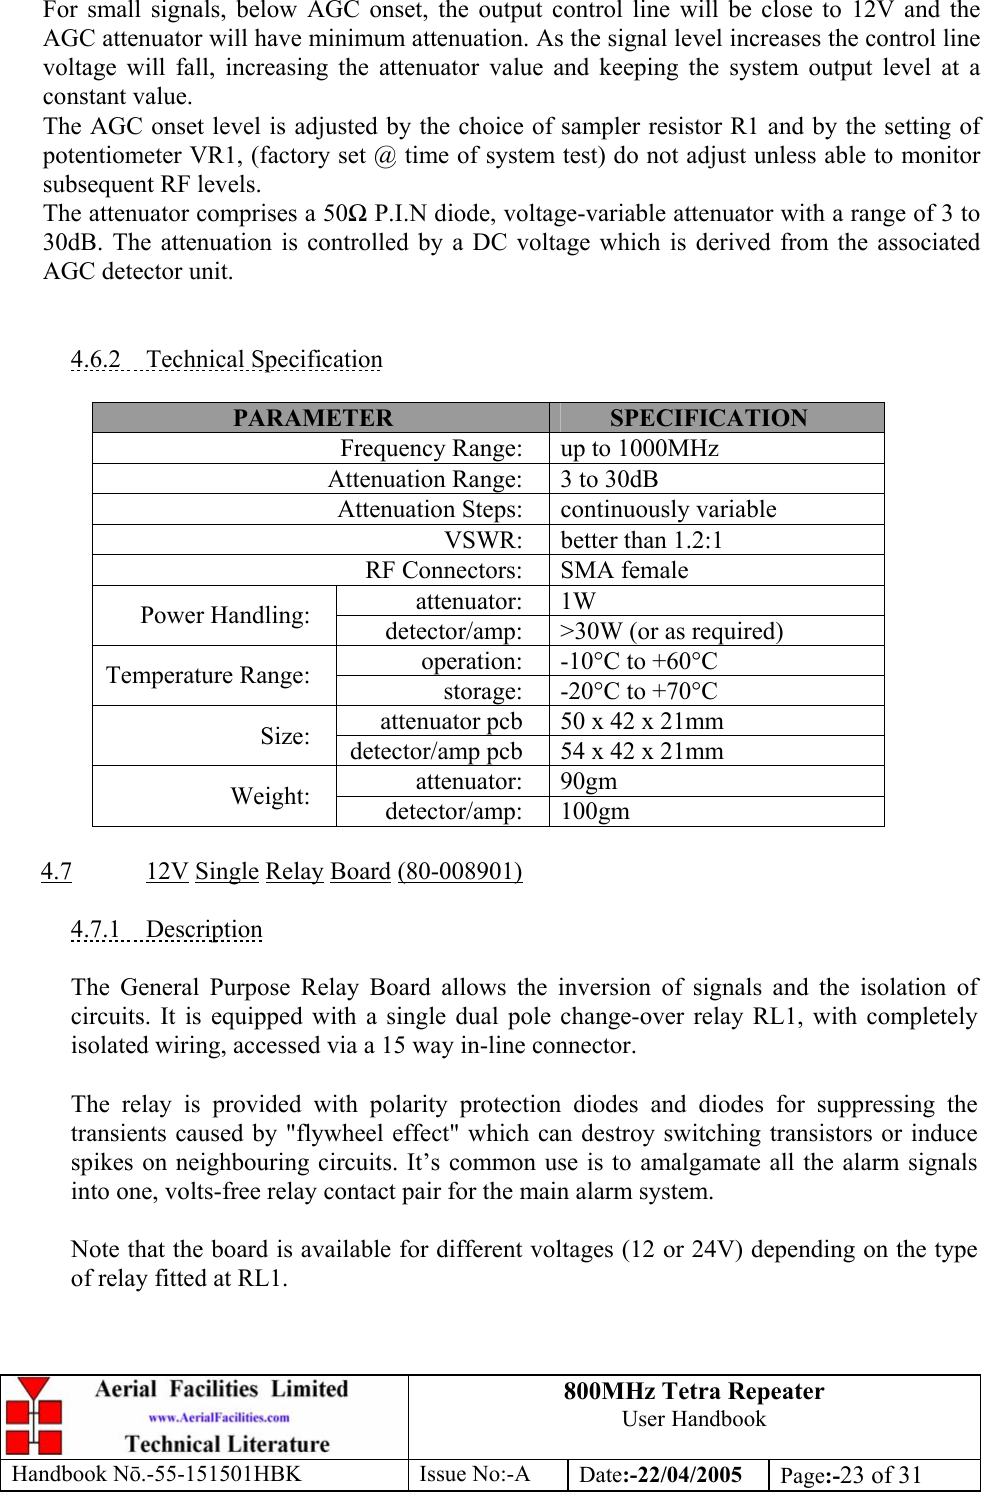 800MHz Tetra Repeater User Handbook Handbook Nō.-55-151501HBK Issue No:-A Date:-22/04/2005  Page:-23 of 31   For small signals, below AGC onset, the output control line will be close to 12V and the AGC attenuator will have minimum attenuation. As the signal level increases the control line voltage will fall, increasing the attenuator value and keeping the system output level at a constant value. The AGC onset level is adjusted by the choice of sampler resistor R1 and by the setting of potentiometer VR1, (factory set @ time of system test) do not adjust unless able to monitor subsequent RF levels. The attenuator comprises a 50Ω P.I.N diode, voltage-variable attenuator with a range of 3 to 30dB. The attenuation is controlled by a DC voltage which is derived from the associated AGC detector unit.   4.6.2 Technical Specification  PARAMETER  SPECIFICATION Frequency Range:  up to 1000MHz Attenuation Range:  3 to 30dB Attenuation Steps:  continuously variable VSWR:  better than 1.2:1 RF Connectors:  SMA female attenuator: 1W Power Handling:  detector/amp:  &gt;30W (or as required) operation:  -10°C to +60°C Temperature Range:  storage:  -20°C to +70°C attenuator pcb  50 x 42 x 21mm Size:  detector/amp pcb  54 x 42 x 21mm attenuator: 90gm Weight:  detector/amp: 100gm  4.7 12V Single Relay Board (80-008901)  4.7.1 Description  The General Purpose Relay Board allows the inversion of signals and the isolation of circuits. It is equipped with a single dual pole change-over relay RL1, with completely isolated wiring, accessed via a 15 way in-line connector.  The relay is provided with polarity protection diodes and diodes for suppressing the transients caused by &quot;flywheel effect&quot; which can destroy switching transistors or induce spikes on neighbouring circuits. It’s common use is to amalgamate all the alarm signals into one, volts-free relay contact pair for the main alarm system.  Note that the board is available for different voltages (12 or 24V) depending on the type of relay fitted at RL1. 